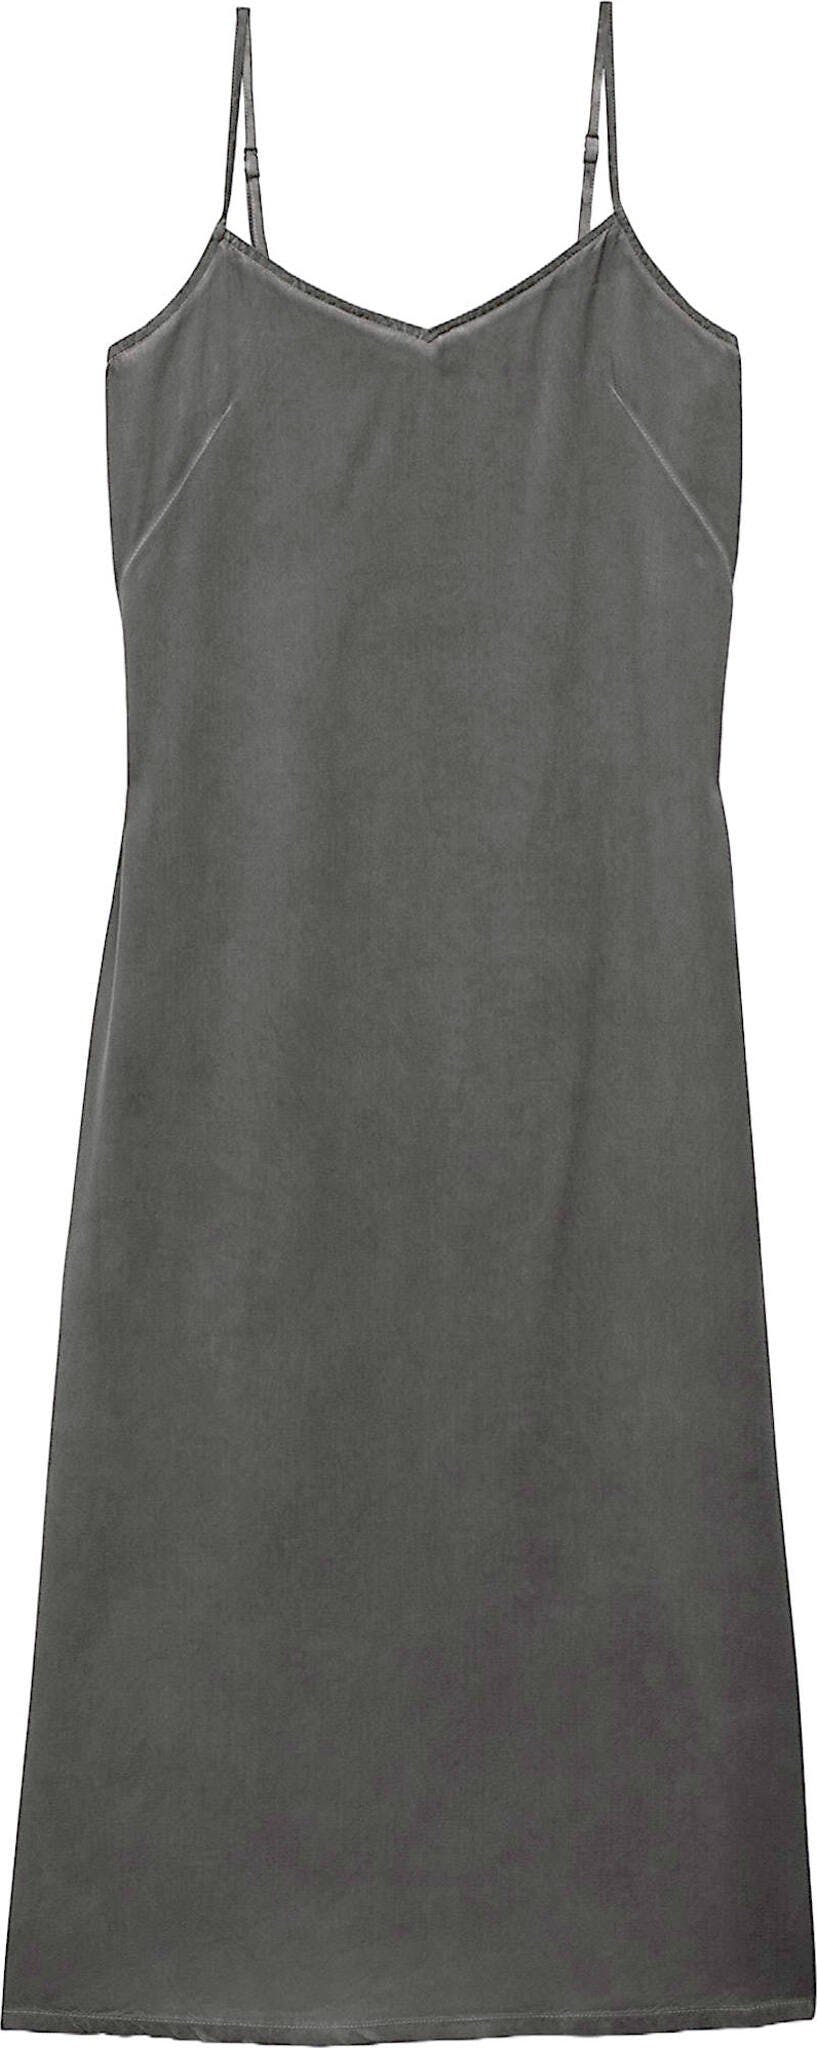 Product image for Campbell Slip Dress - Women's